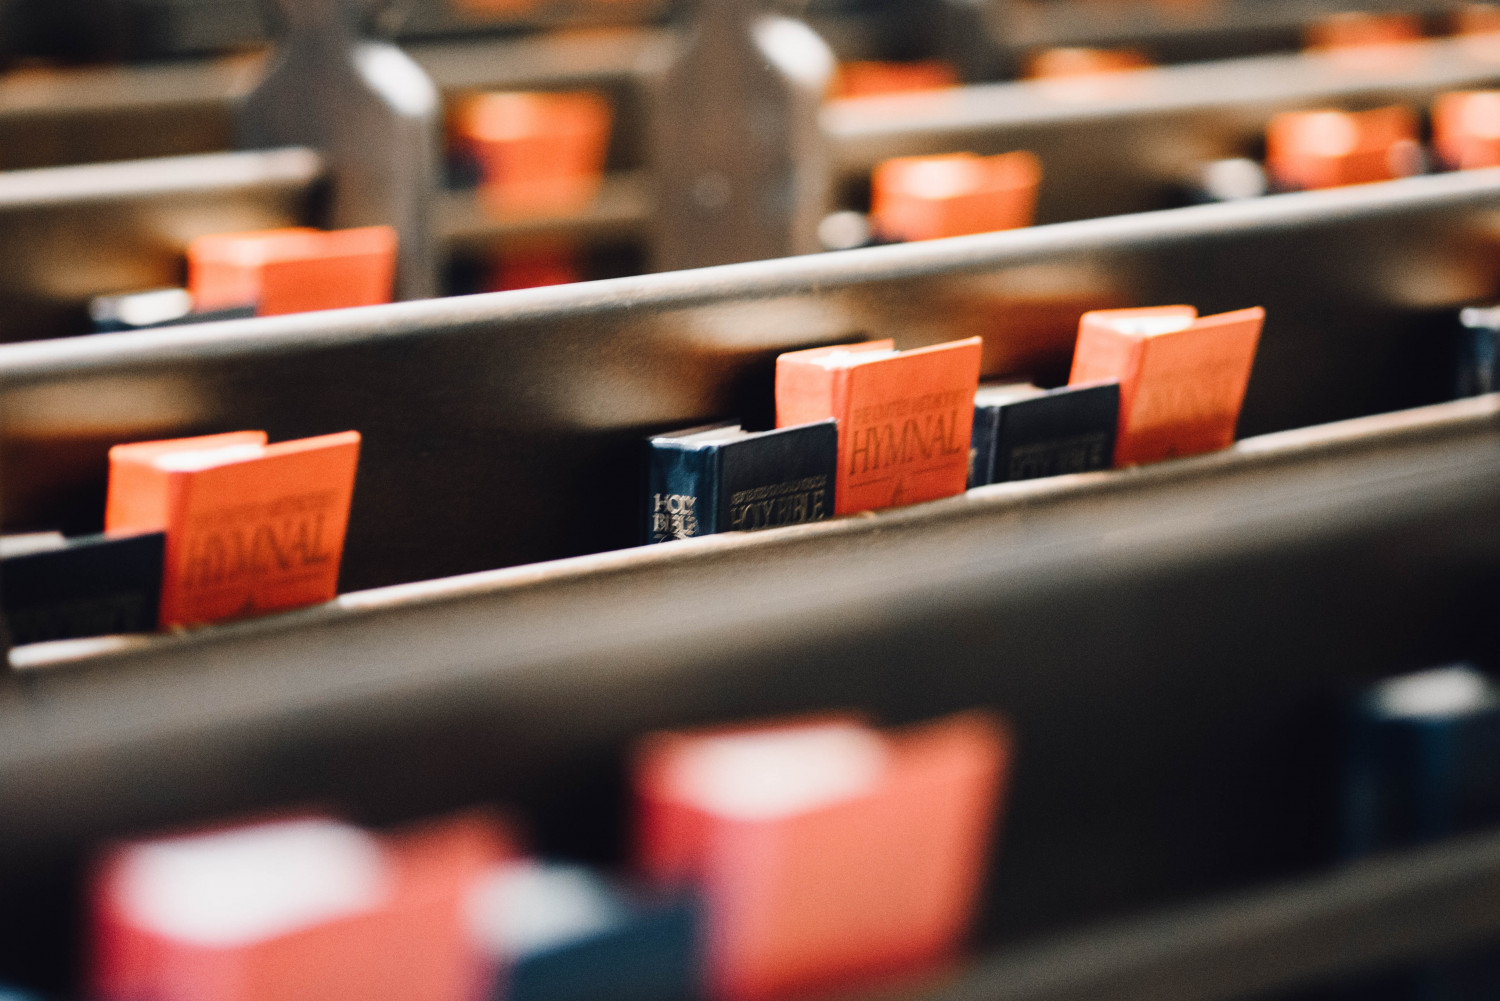 Image of church pews with bibles and psalm books.